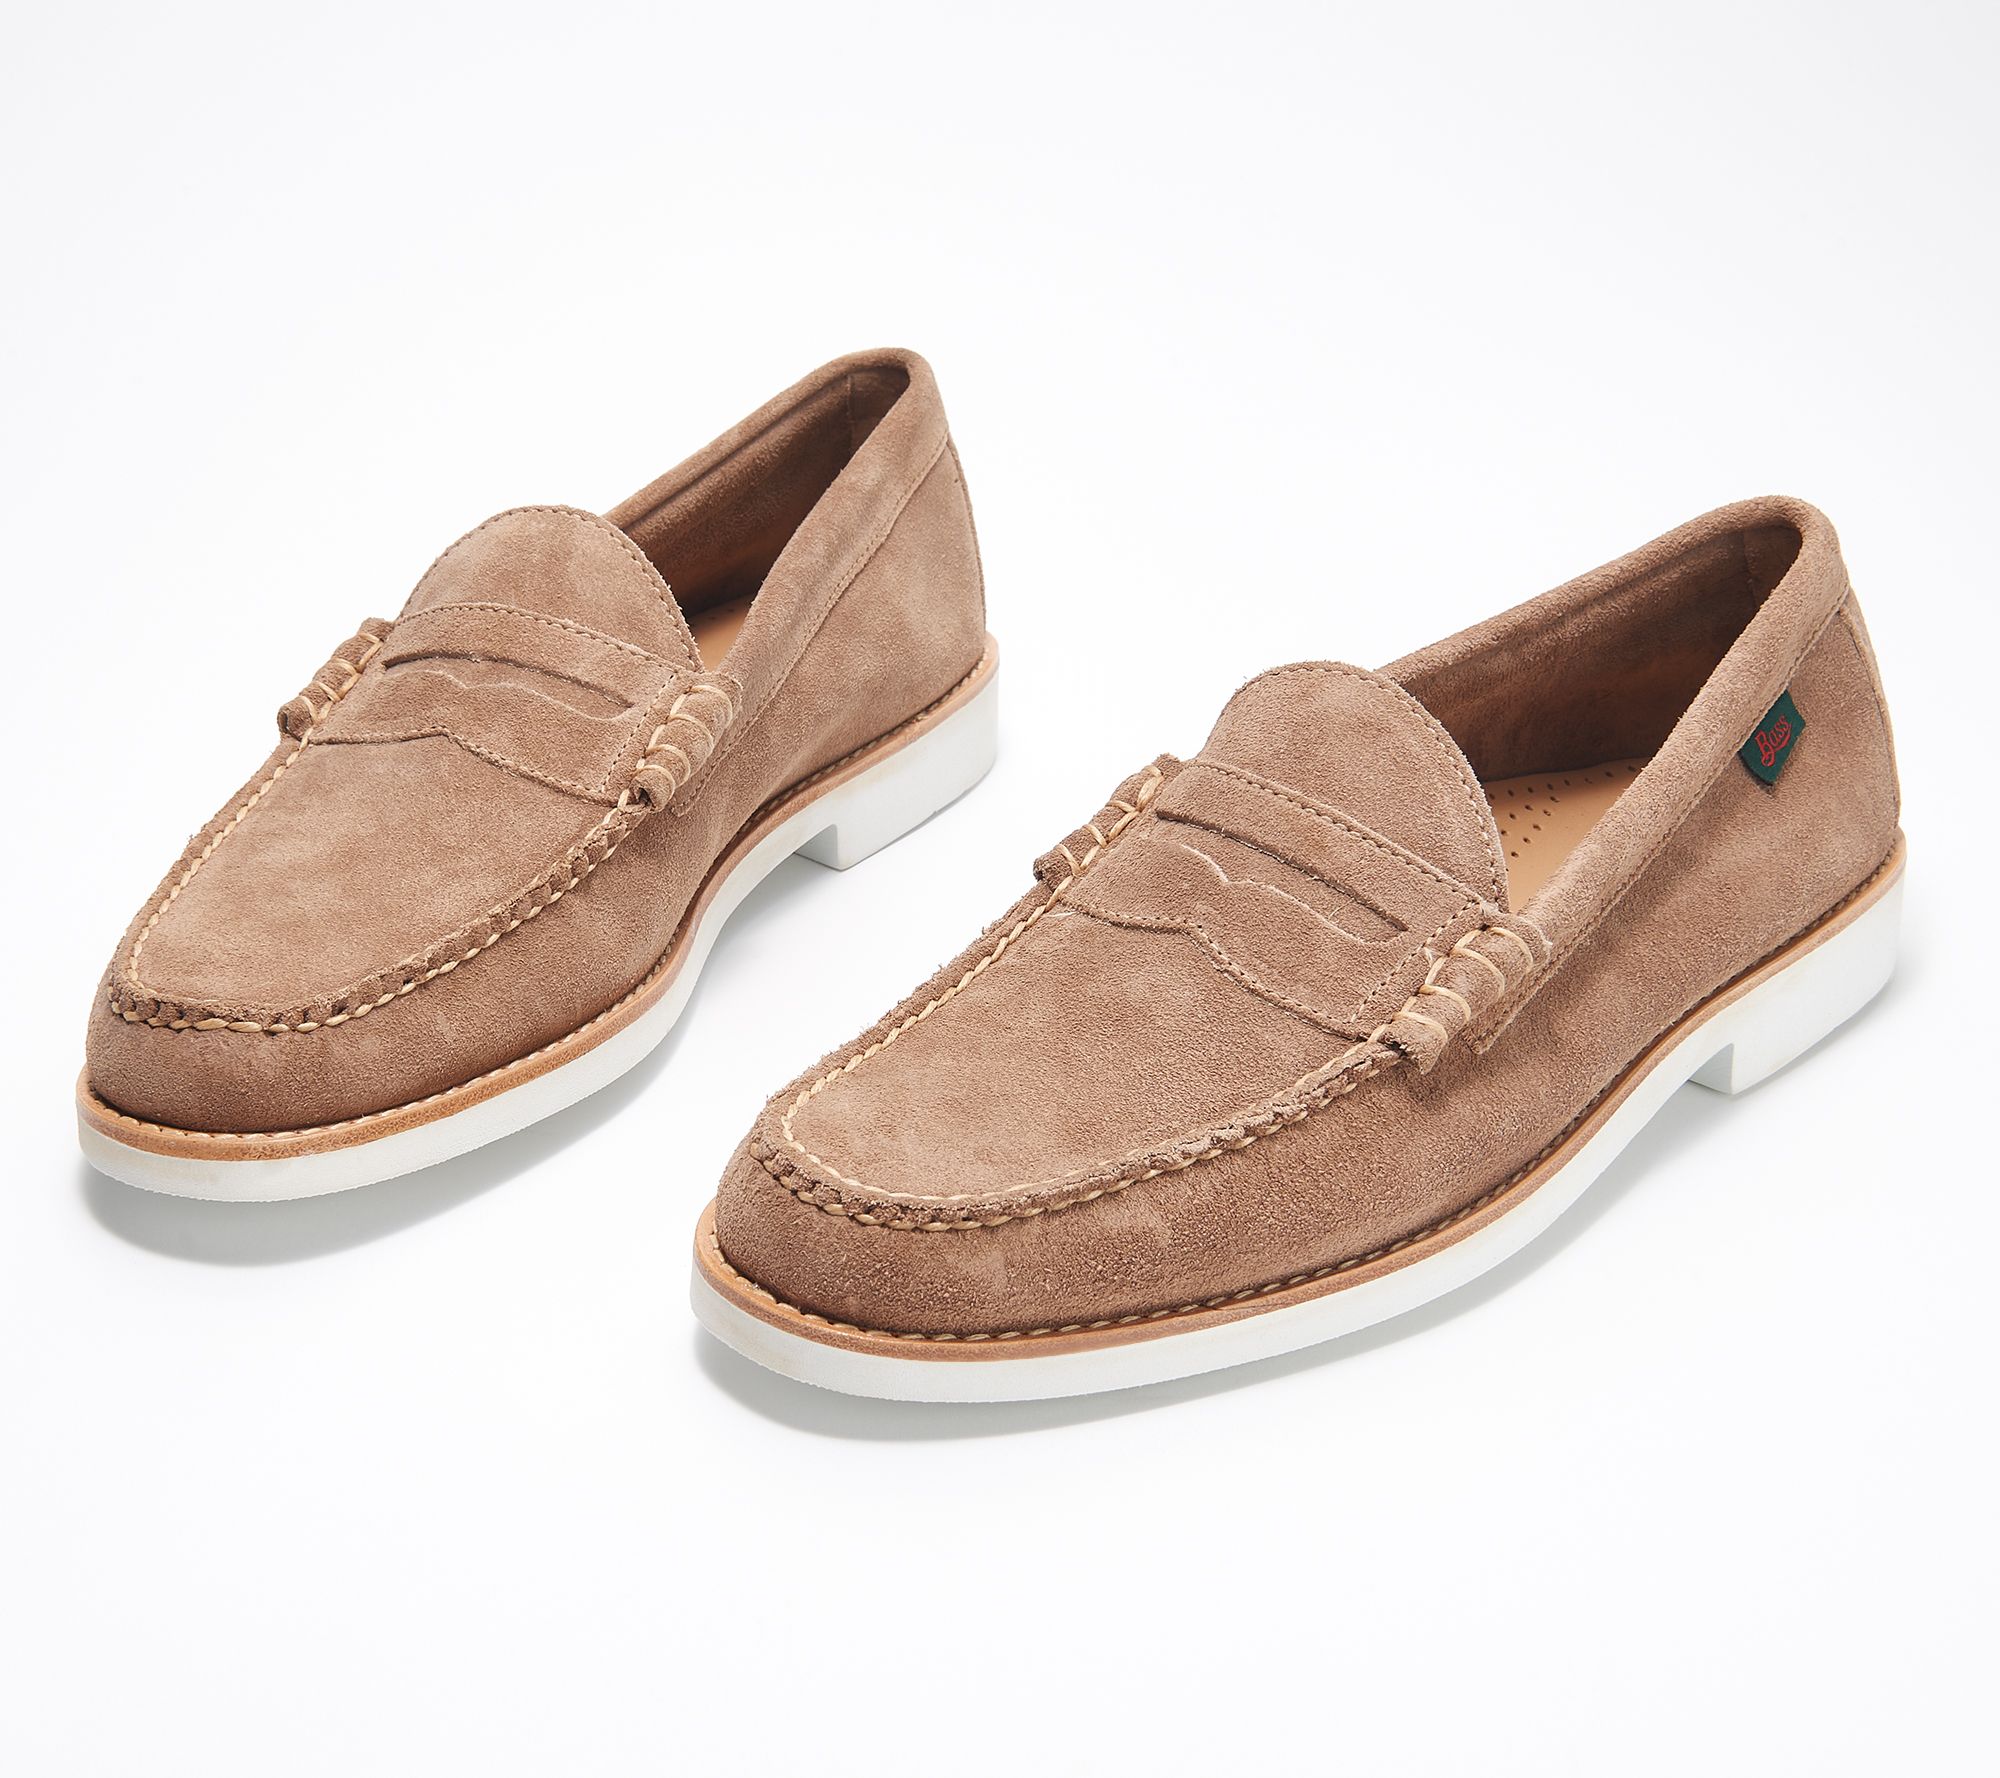 The Penny Loafer and how best to style this classic shoe, Thomas Bird